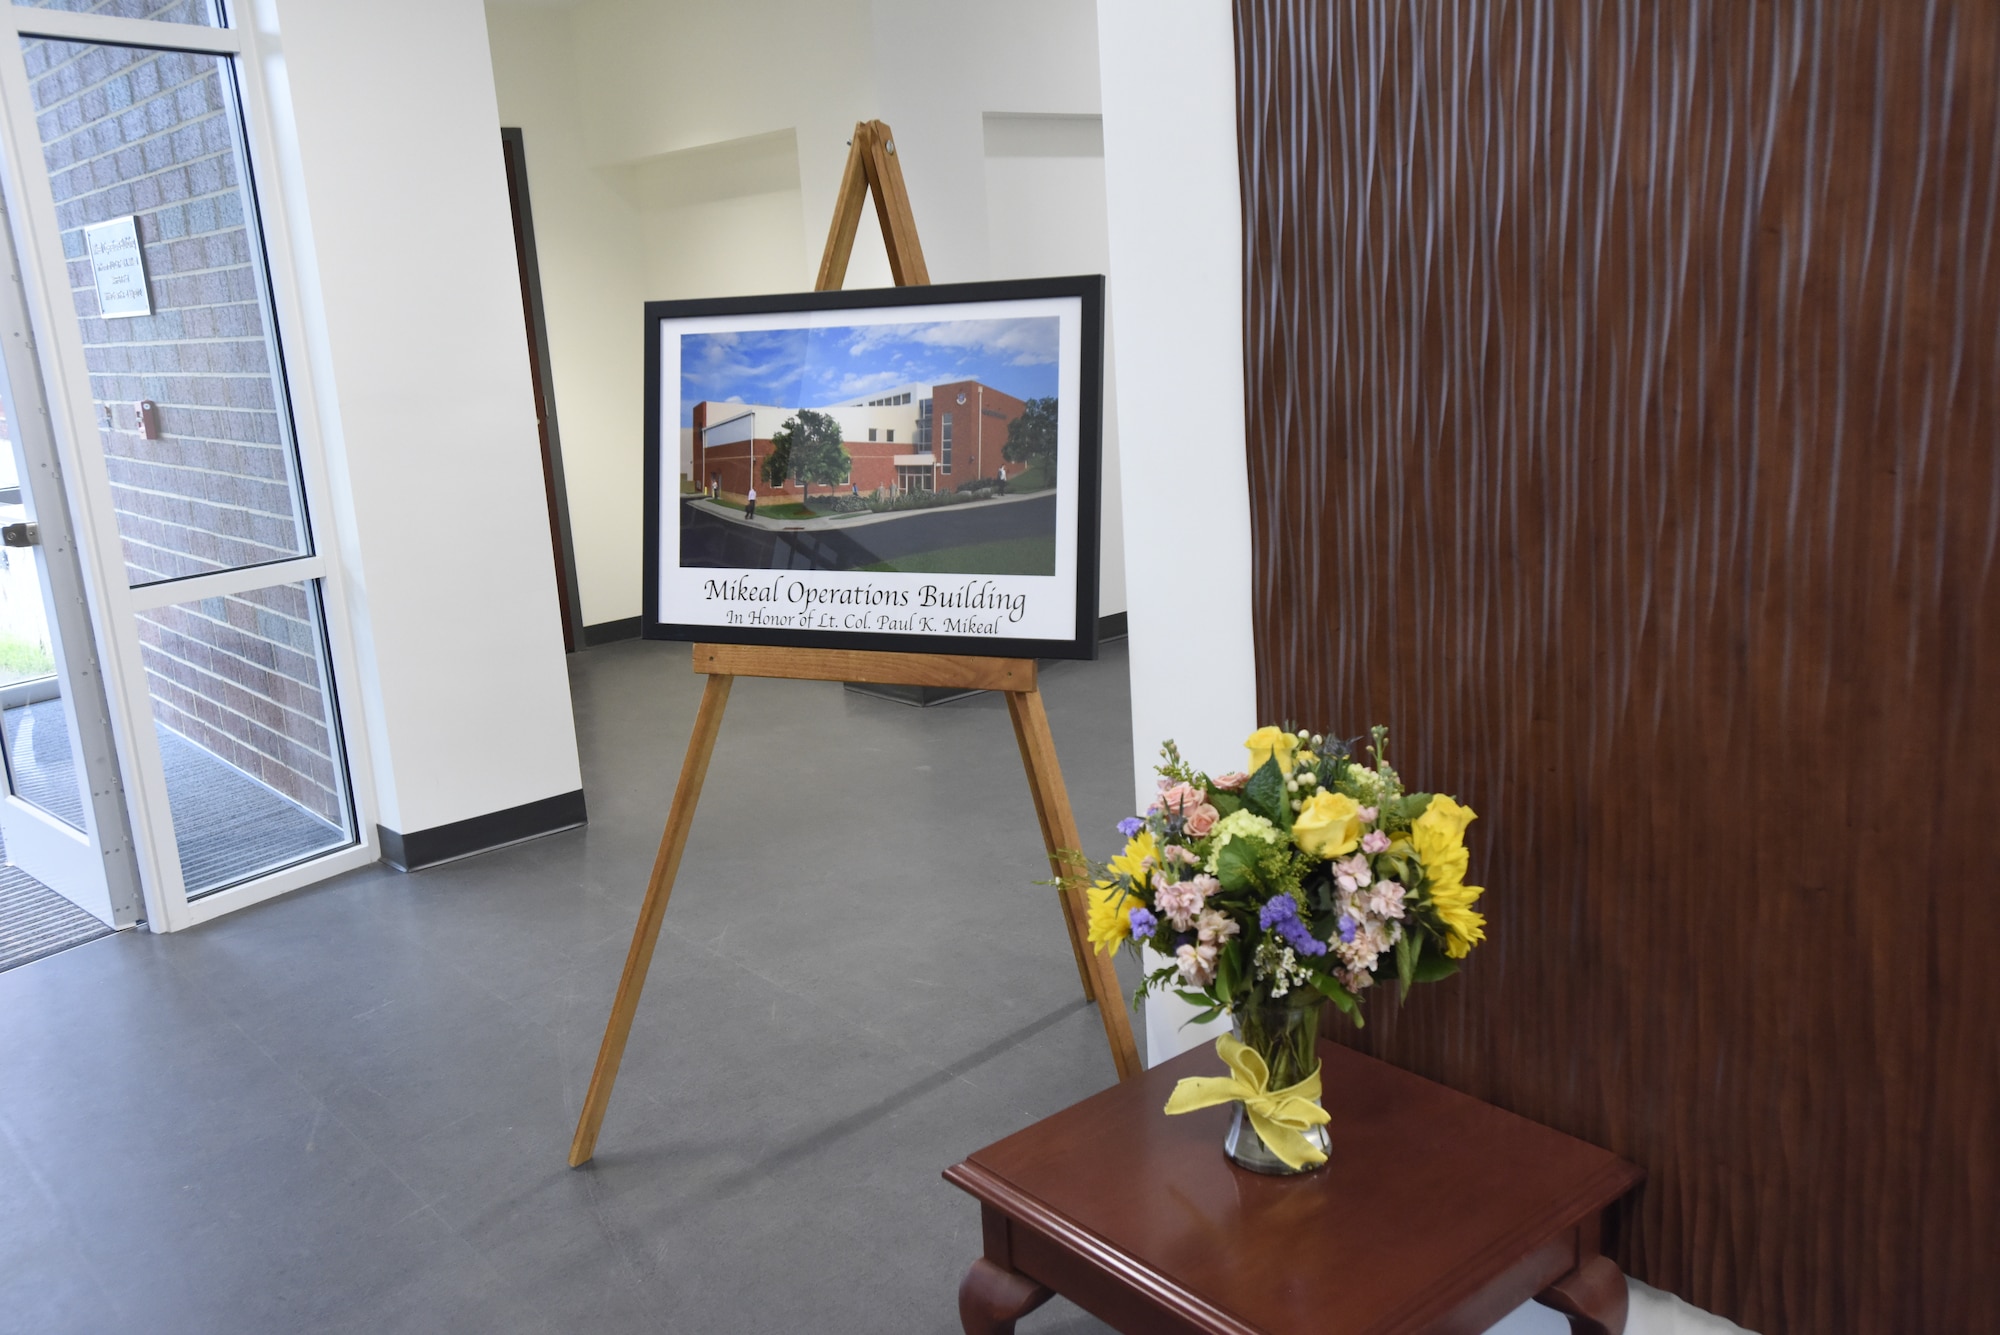 A commemorative picture is displayed during the dedication of the 145th Airlift Wing C-17 operations building to U.S. Air Force Lt. Col. Joseph Mikeal, at the North Carolina Air National Guard Base, Charlotte Douglas International Airport, June 9, 2019. Lt. Col. Mikeal tragically lost his life alongside 3 other C-130 crew members in the MAFFS 7 aircraft accident in 2012, the 145th Airlift Wing honored his and the other crew members sacrifice by naming four buildings across the wing after each one.